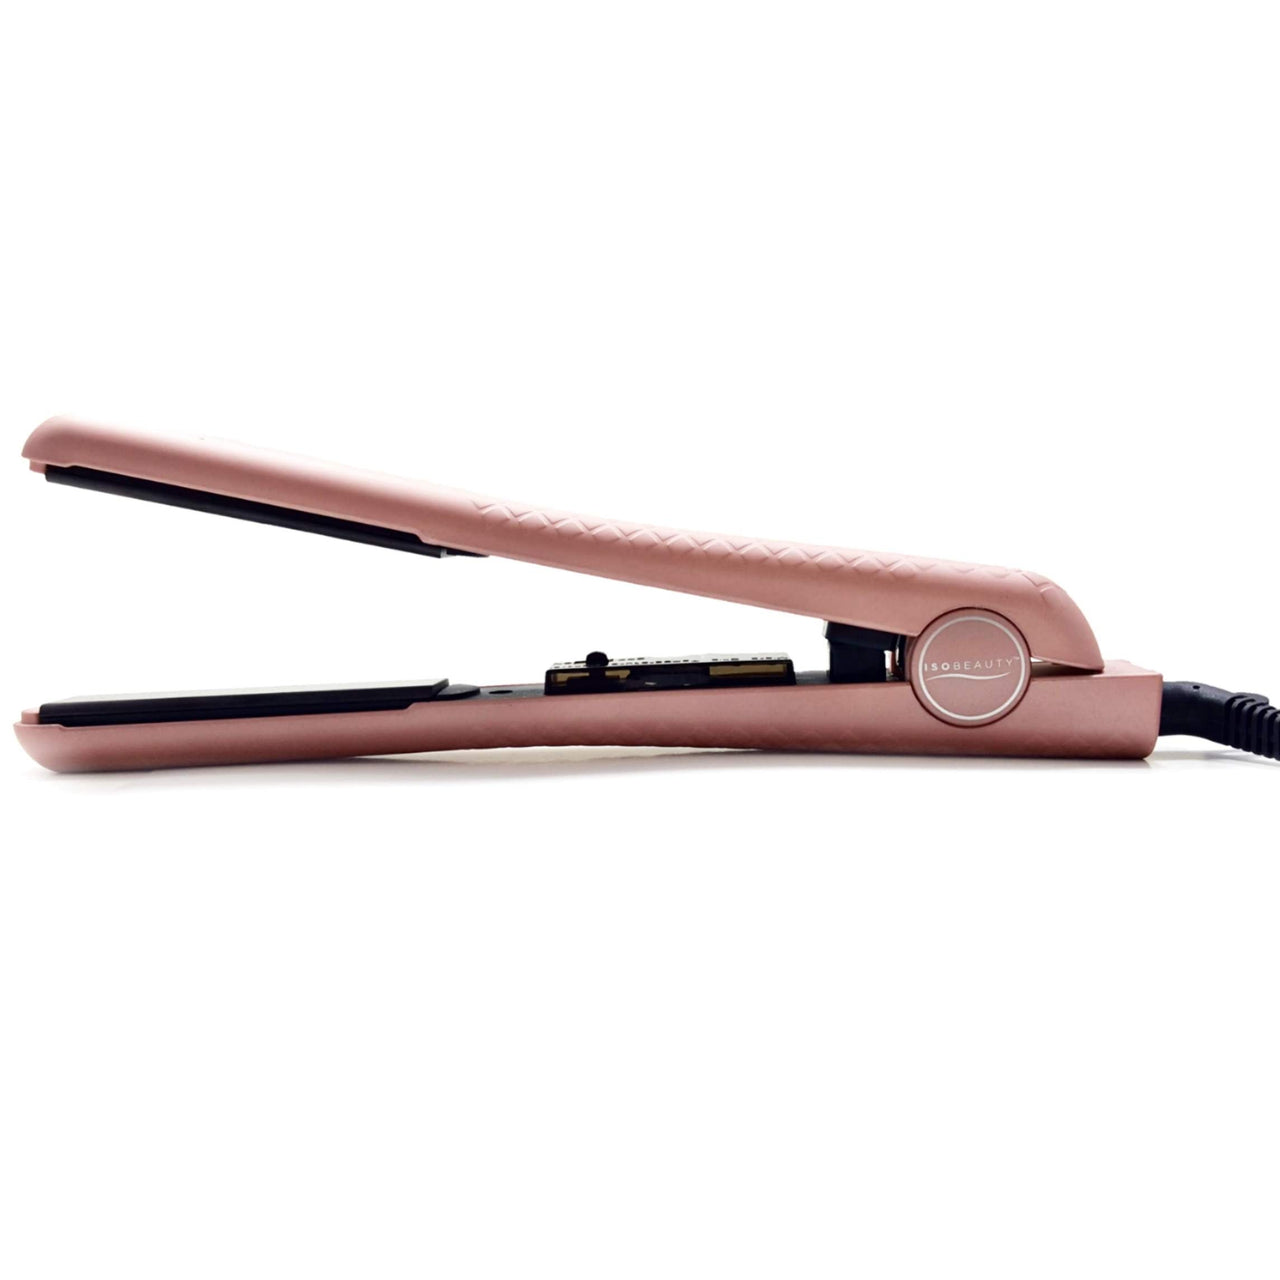 Soft Touch 1.25" Ceramic Plates Flat Iron Straightener with Adjustable Temperature Rose Gold